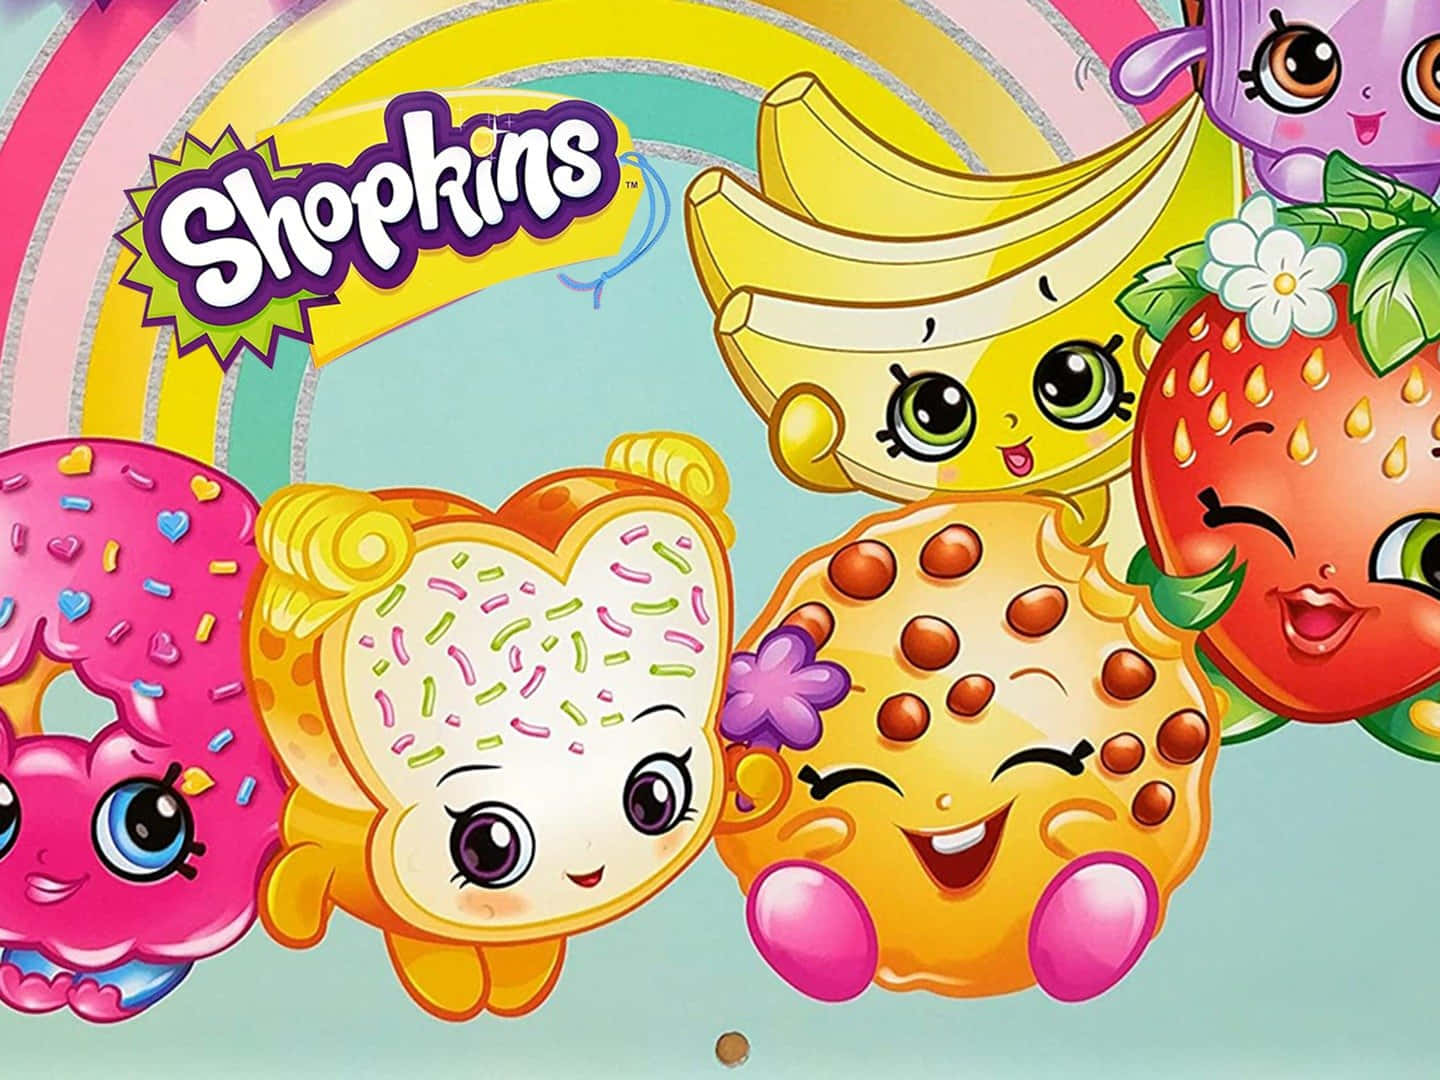 Adorable Collection of Shopkins Characters on Display